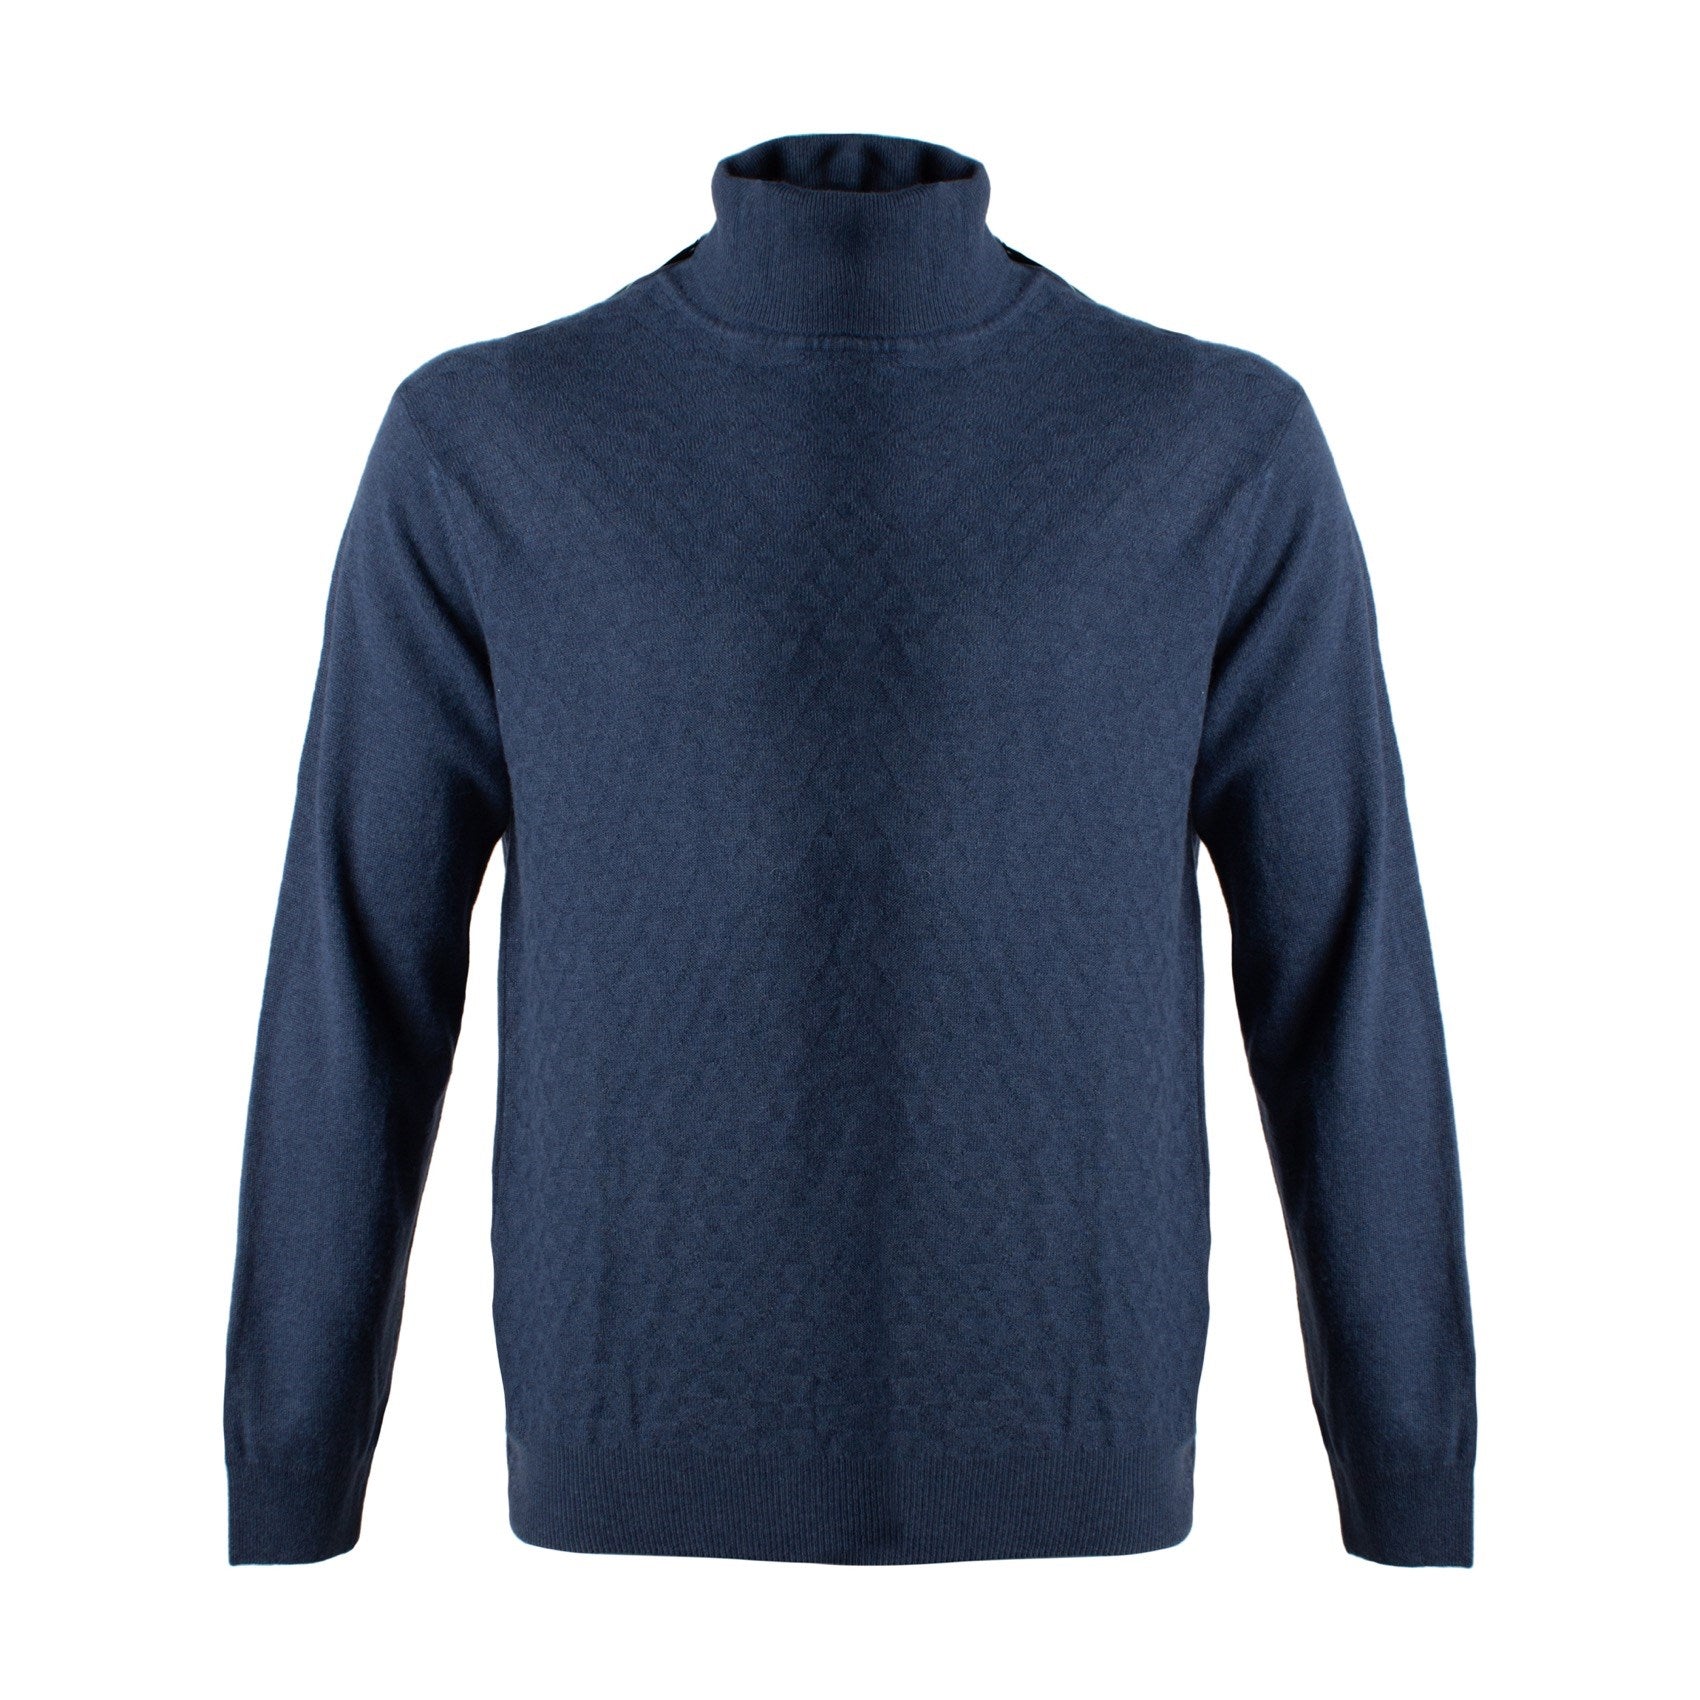 Wool & Cashmere Blend Eco-Friendly Turtleneck Sweater in Blue by Viyella